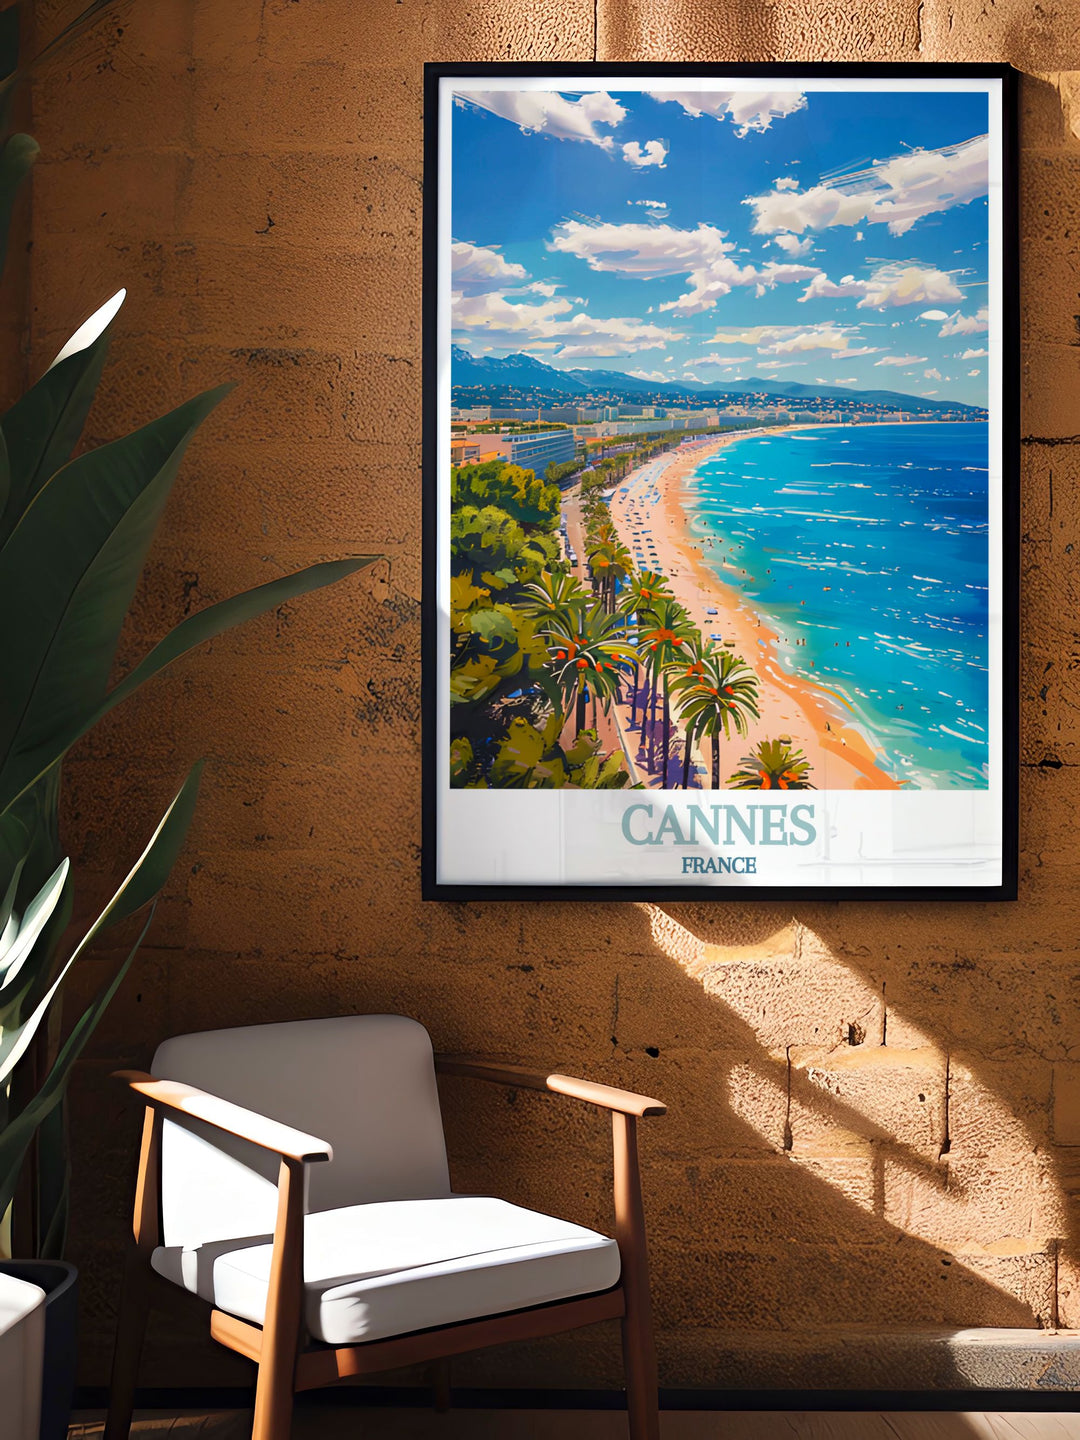 Beautiful La Croisette home decor capturing the vibrant energy of Cannes this France art print is an elegant addition to any interior perfect for those who appreciate France travel art and wish to bring a piece of French elegance into their home